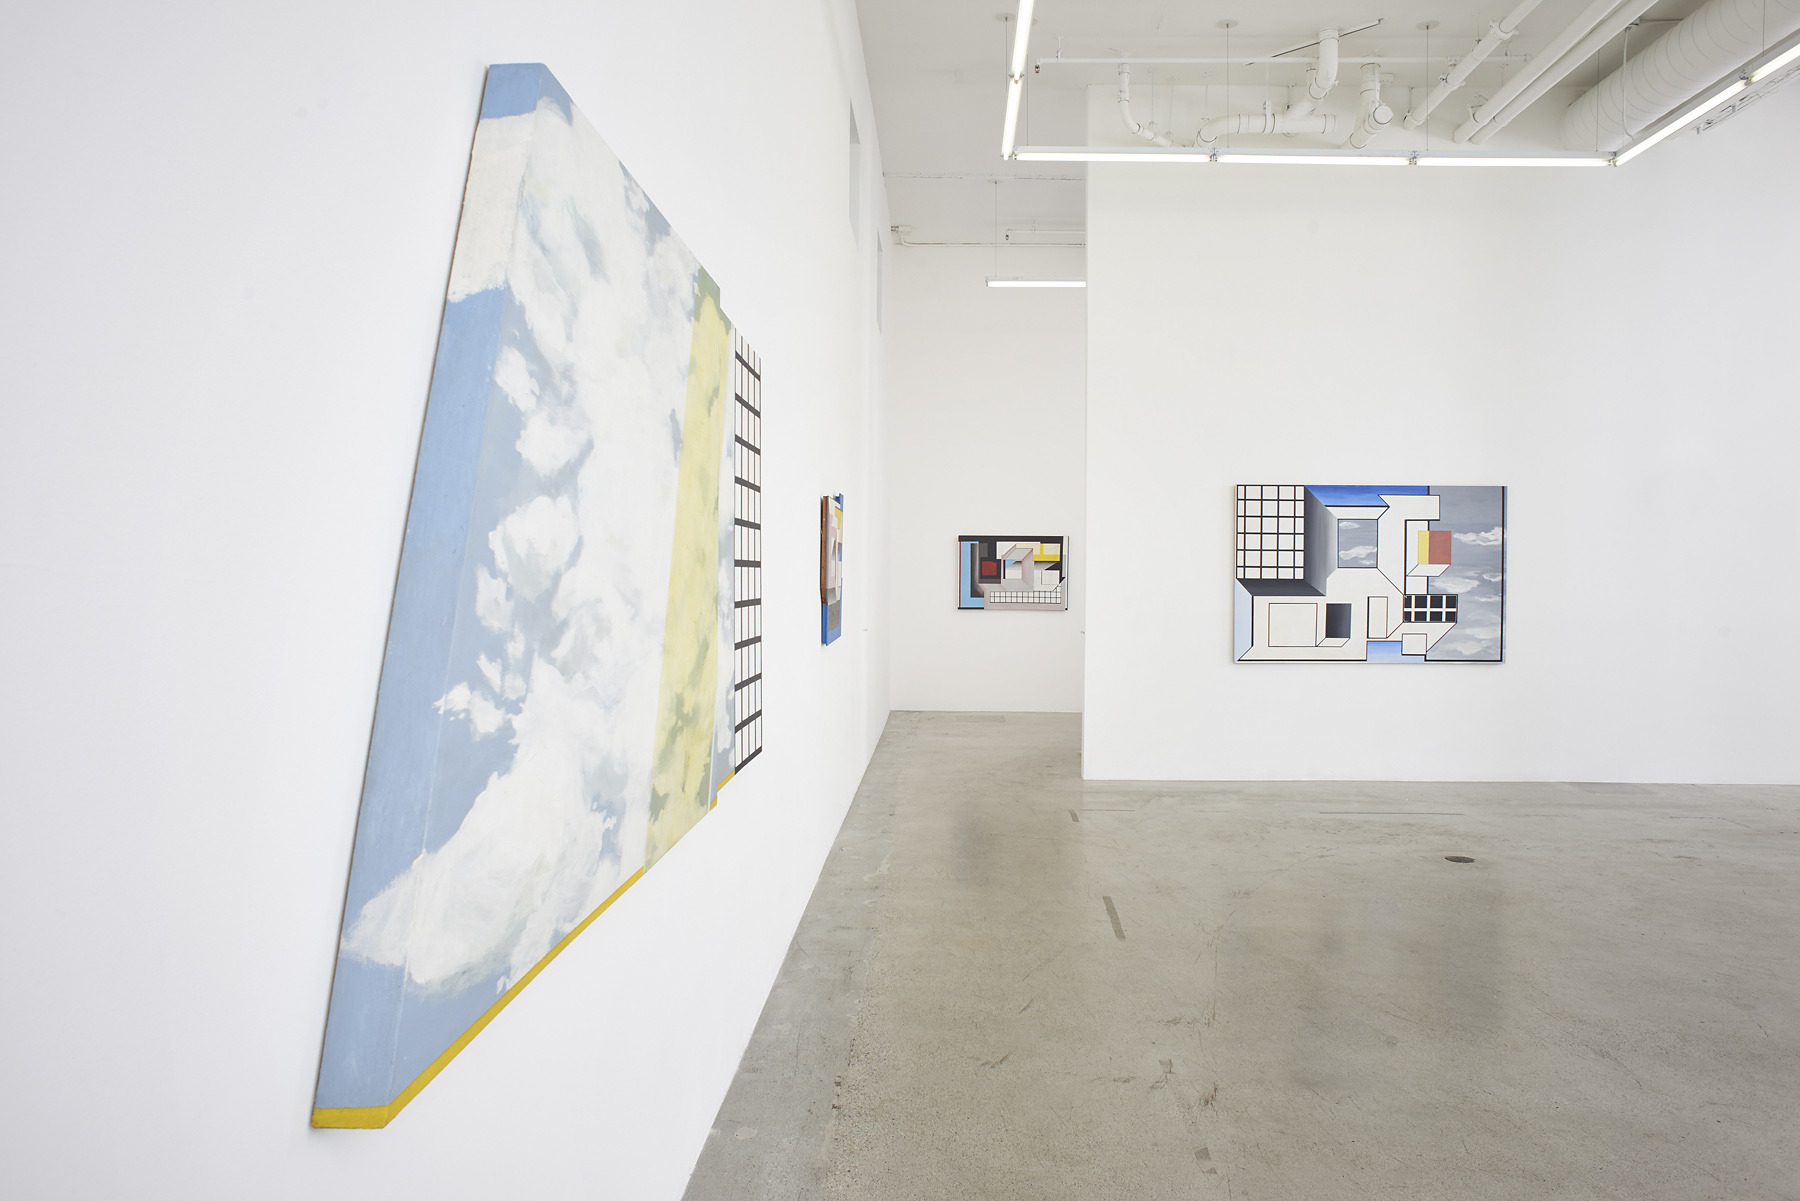 Installation view, 1960s Portal Paintings, Suzanne Blank Redstone at Jessica Silverman Gallery, San Francisco, 2016. Courtesy of Jessica Silverman Gallery.